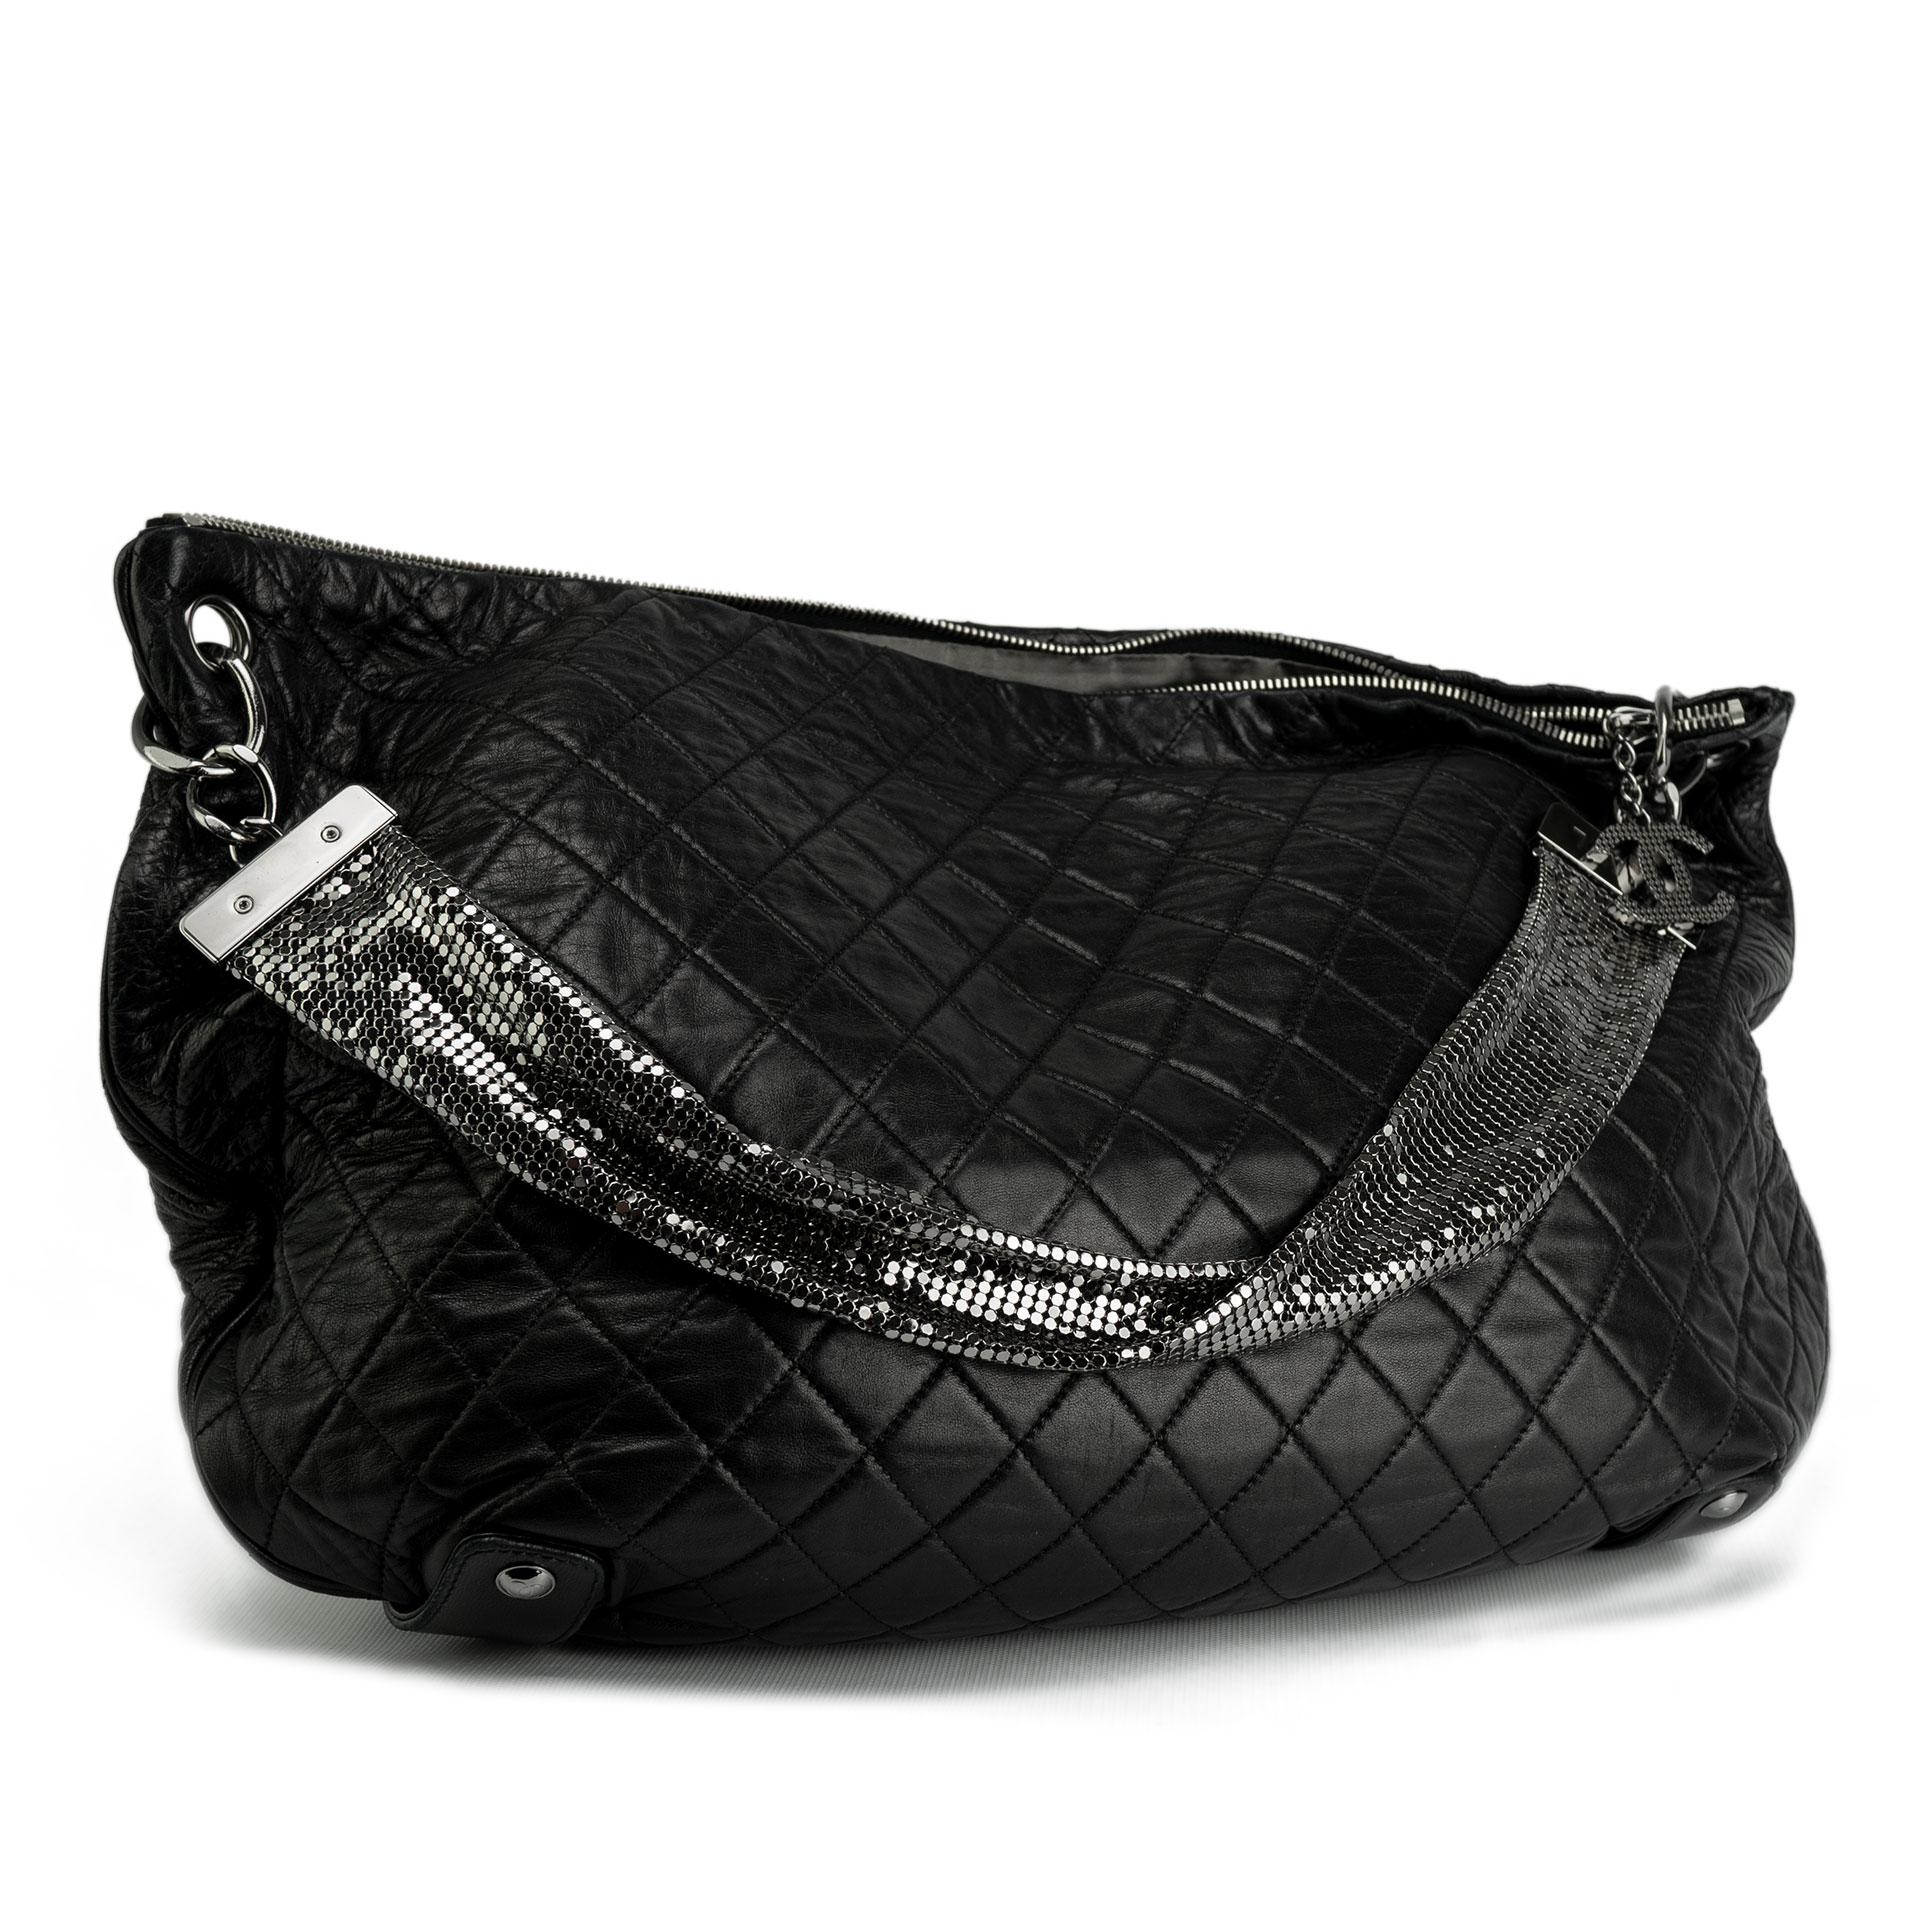 Chanel 2008 Metallic Mesh Soft Quilted Black Lambskin Leather Large Hobo Bag For Sale 2